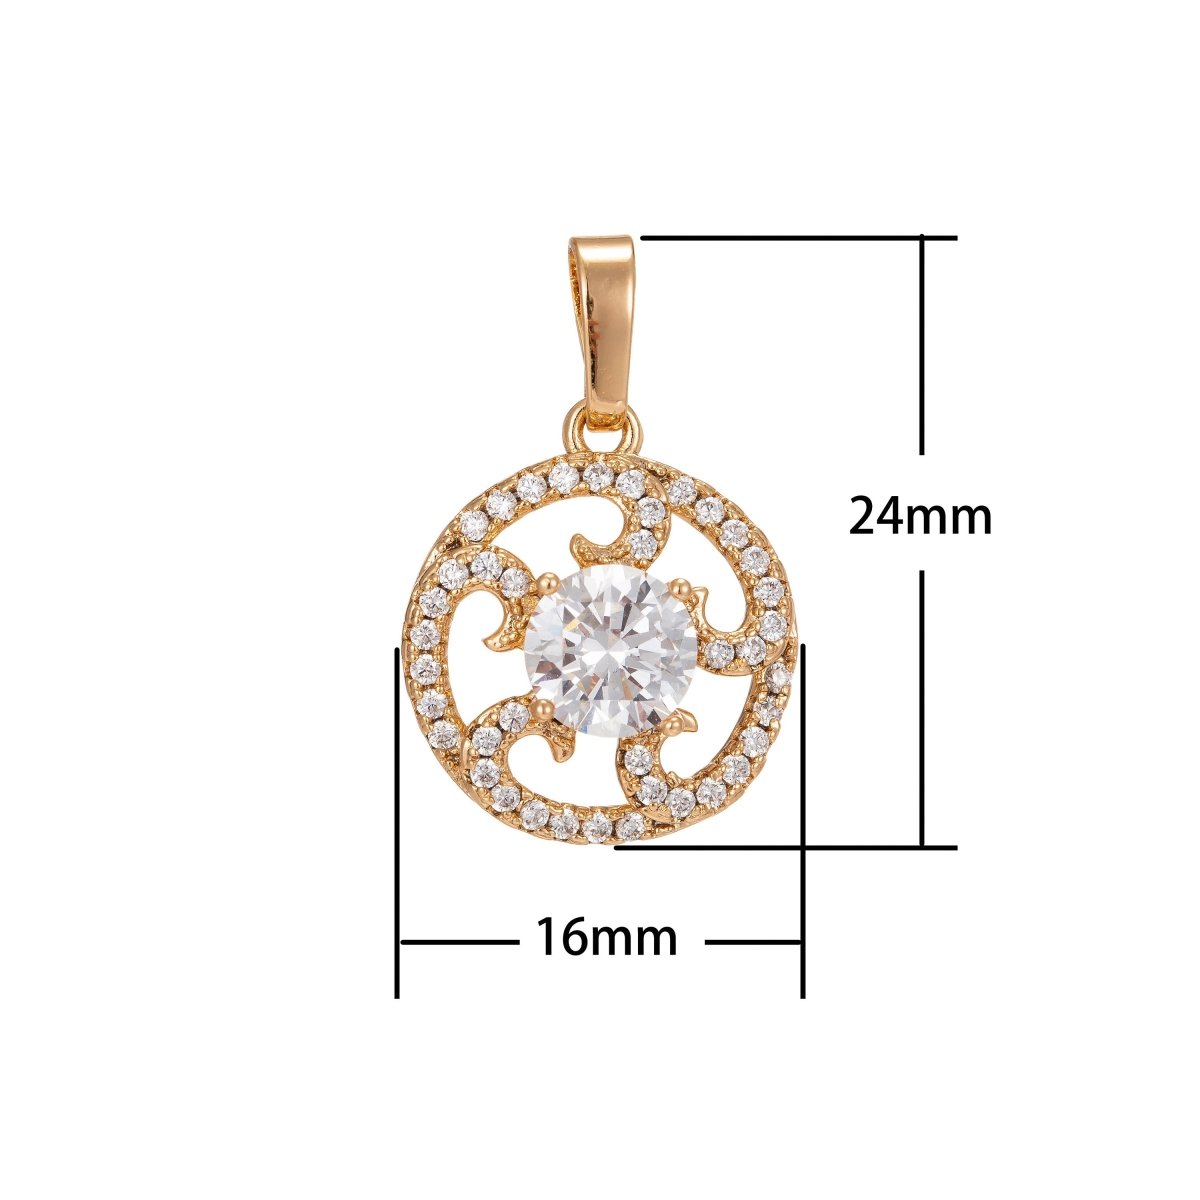 Dainty Micro Pave Gold Filled Sun Burst Charm 24x16mm, Cubic Zirconia PENDANT Charm For Necklace Making, Jewelry Component Supply I-243 - DLUXCA